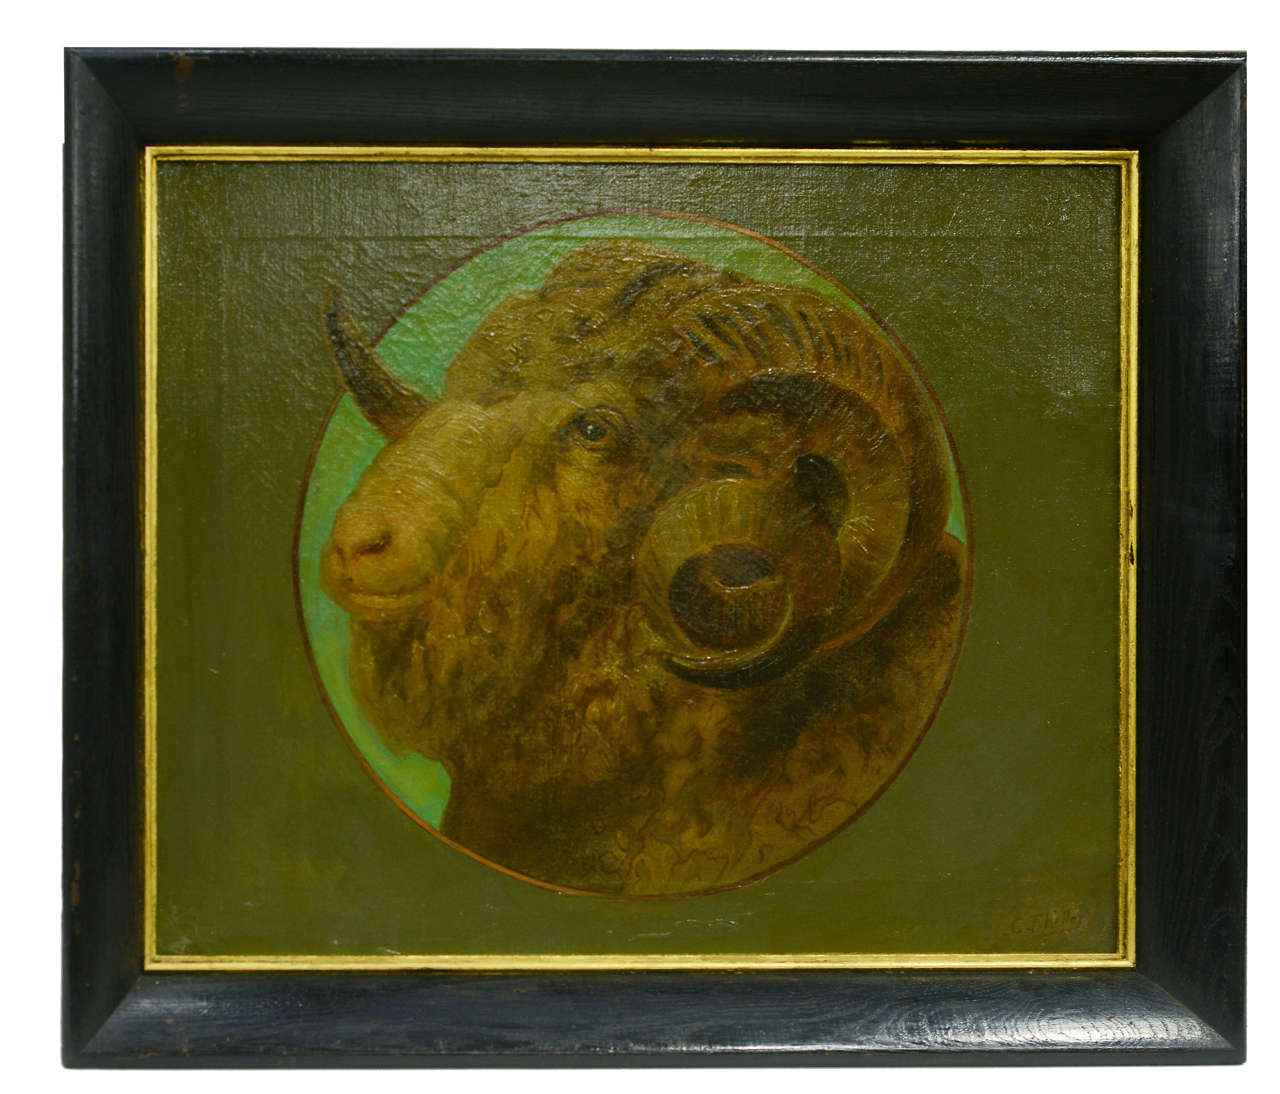 Framed Oil Painting of a Ram's Head signed by C.F. Keller